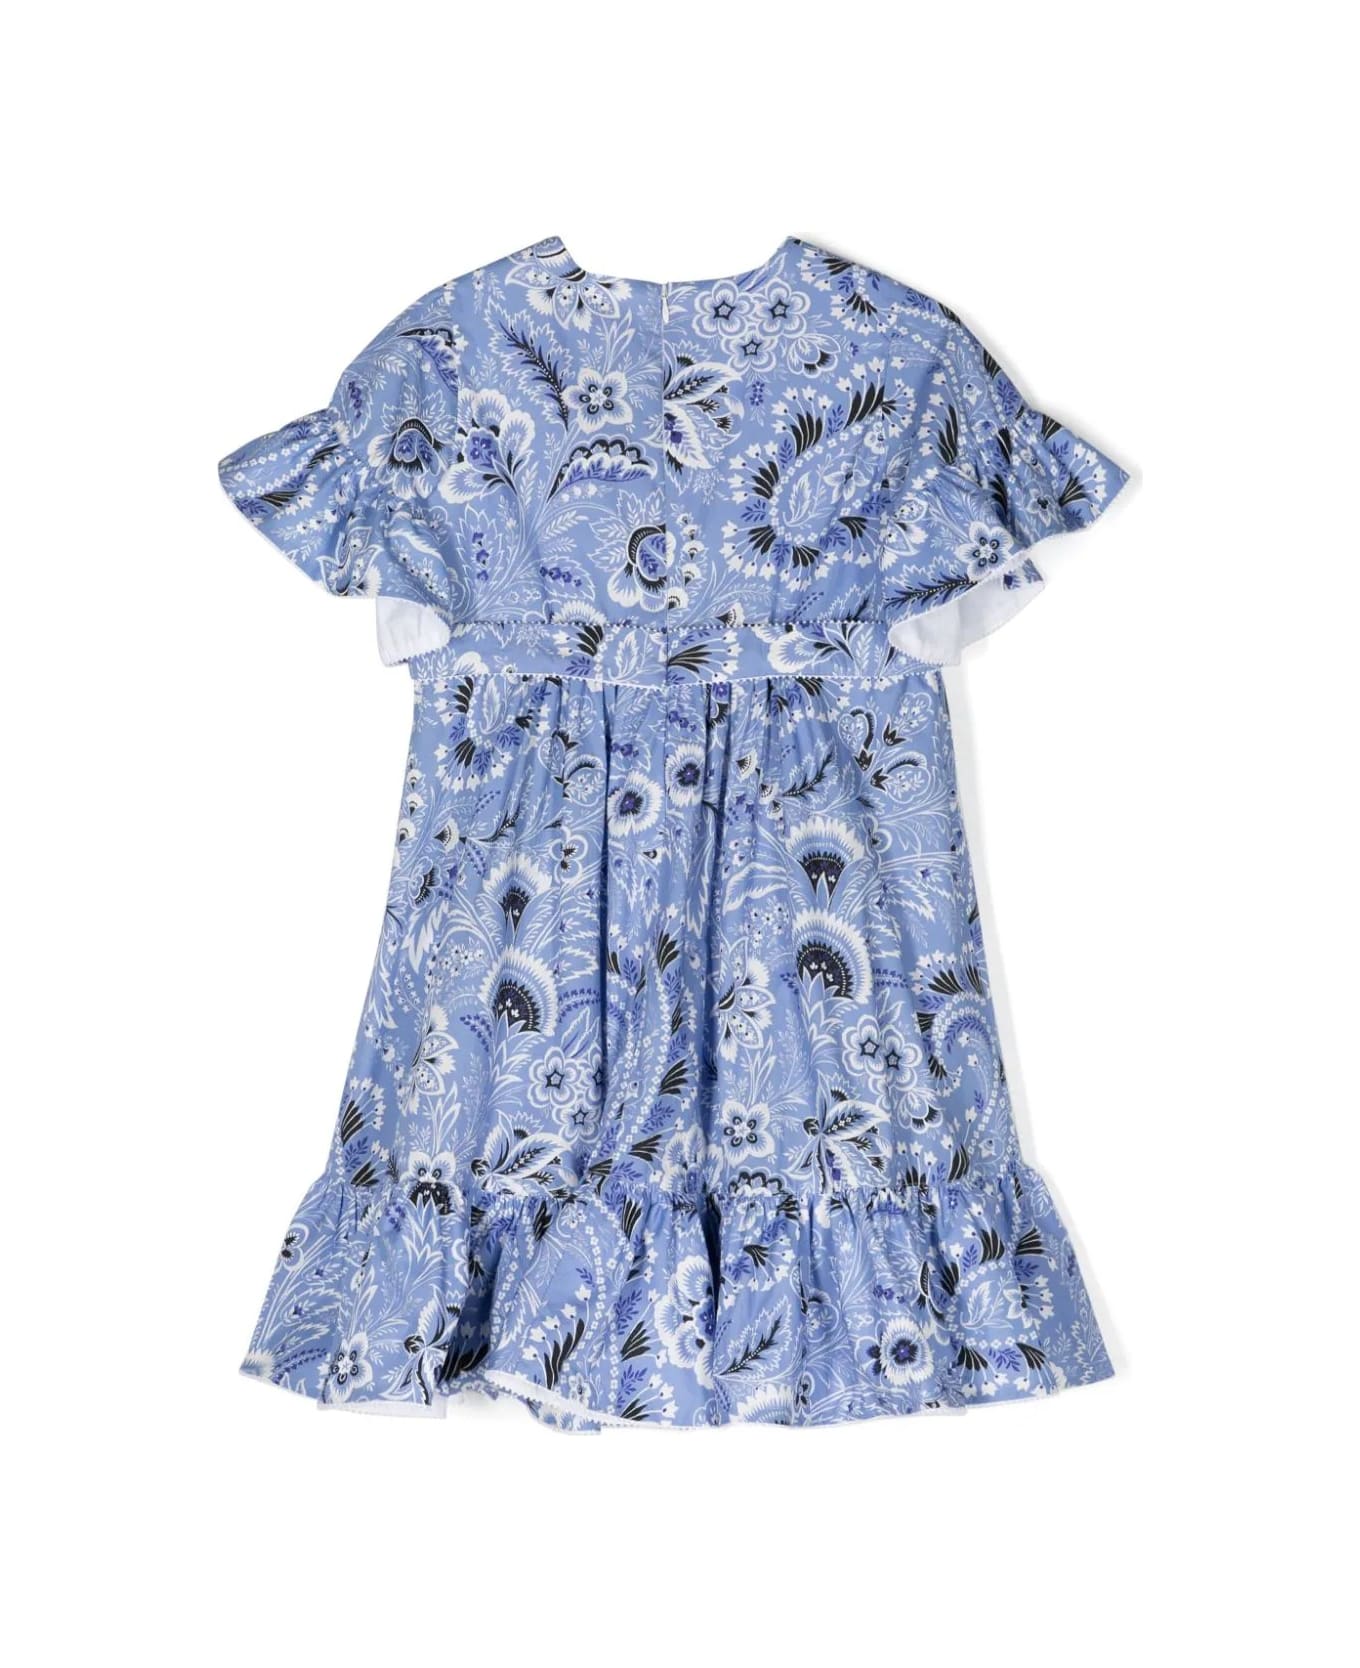 Etro Light Blue Dress With Ruffles And Paisley Print - Blue